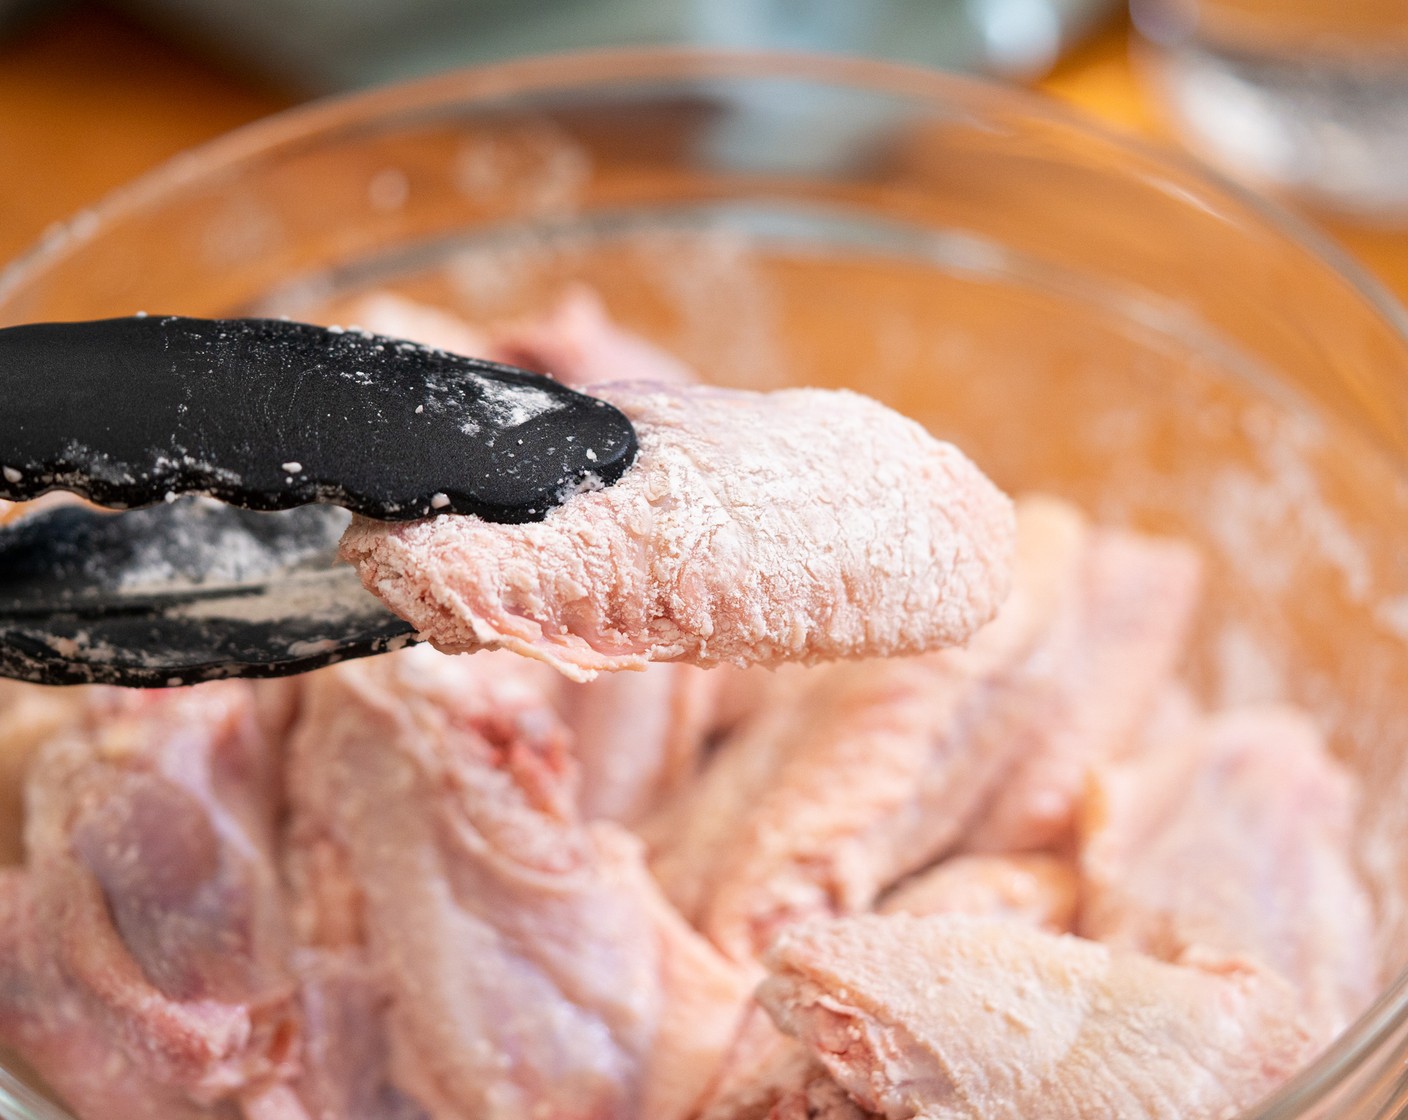 step 1 In a large bowl, combine Corn Starch (1/4 cup), Kosher Salt (1/2 Tbsp), and Baking Powder (1/2 tsp). Add the Chicken Wings (2 lb) and toss to coat. Shake off any extra seasoning and transfer to a tray. Let it sit in the fridge uncovered for 30 minutes (up to overnight).